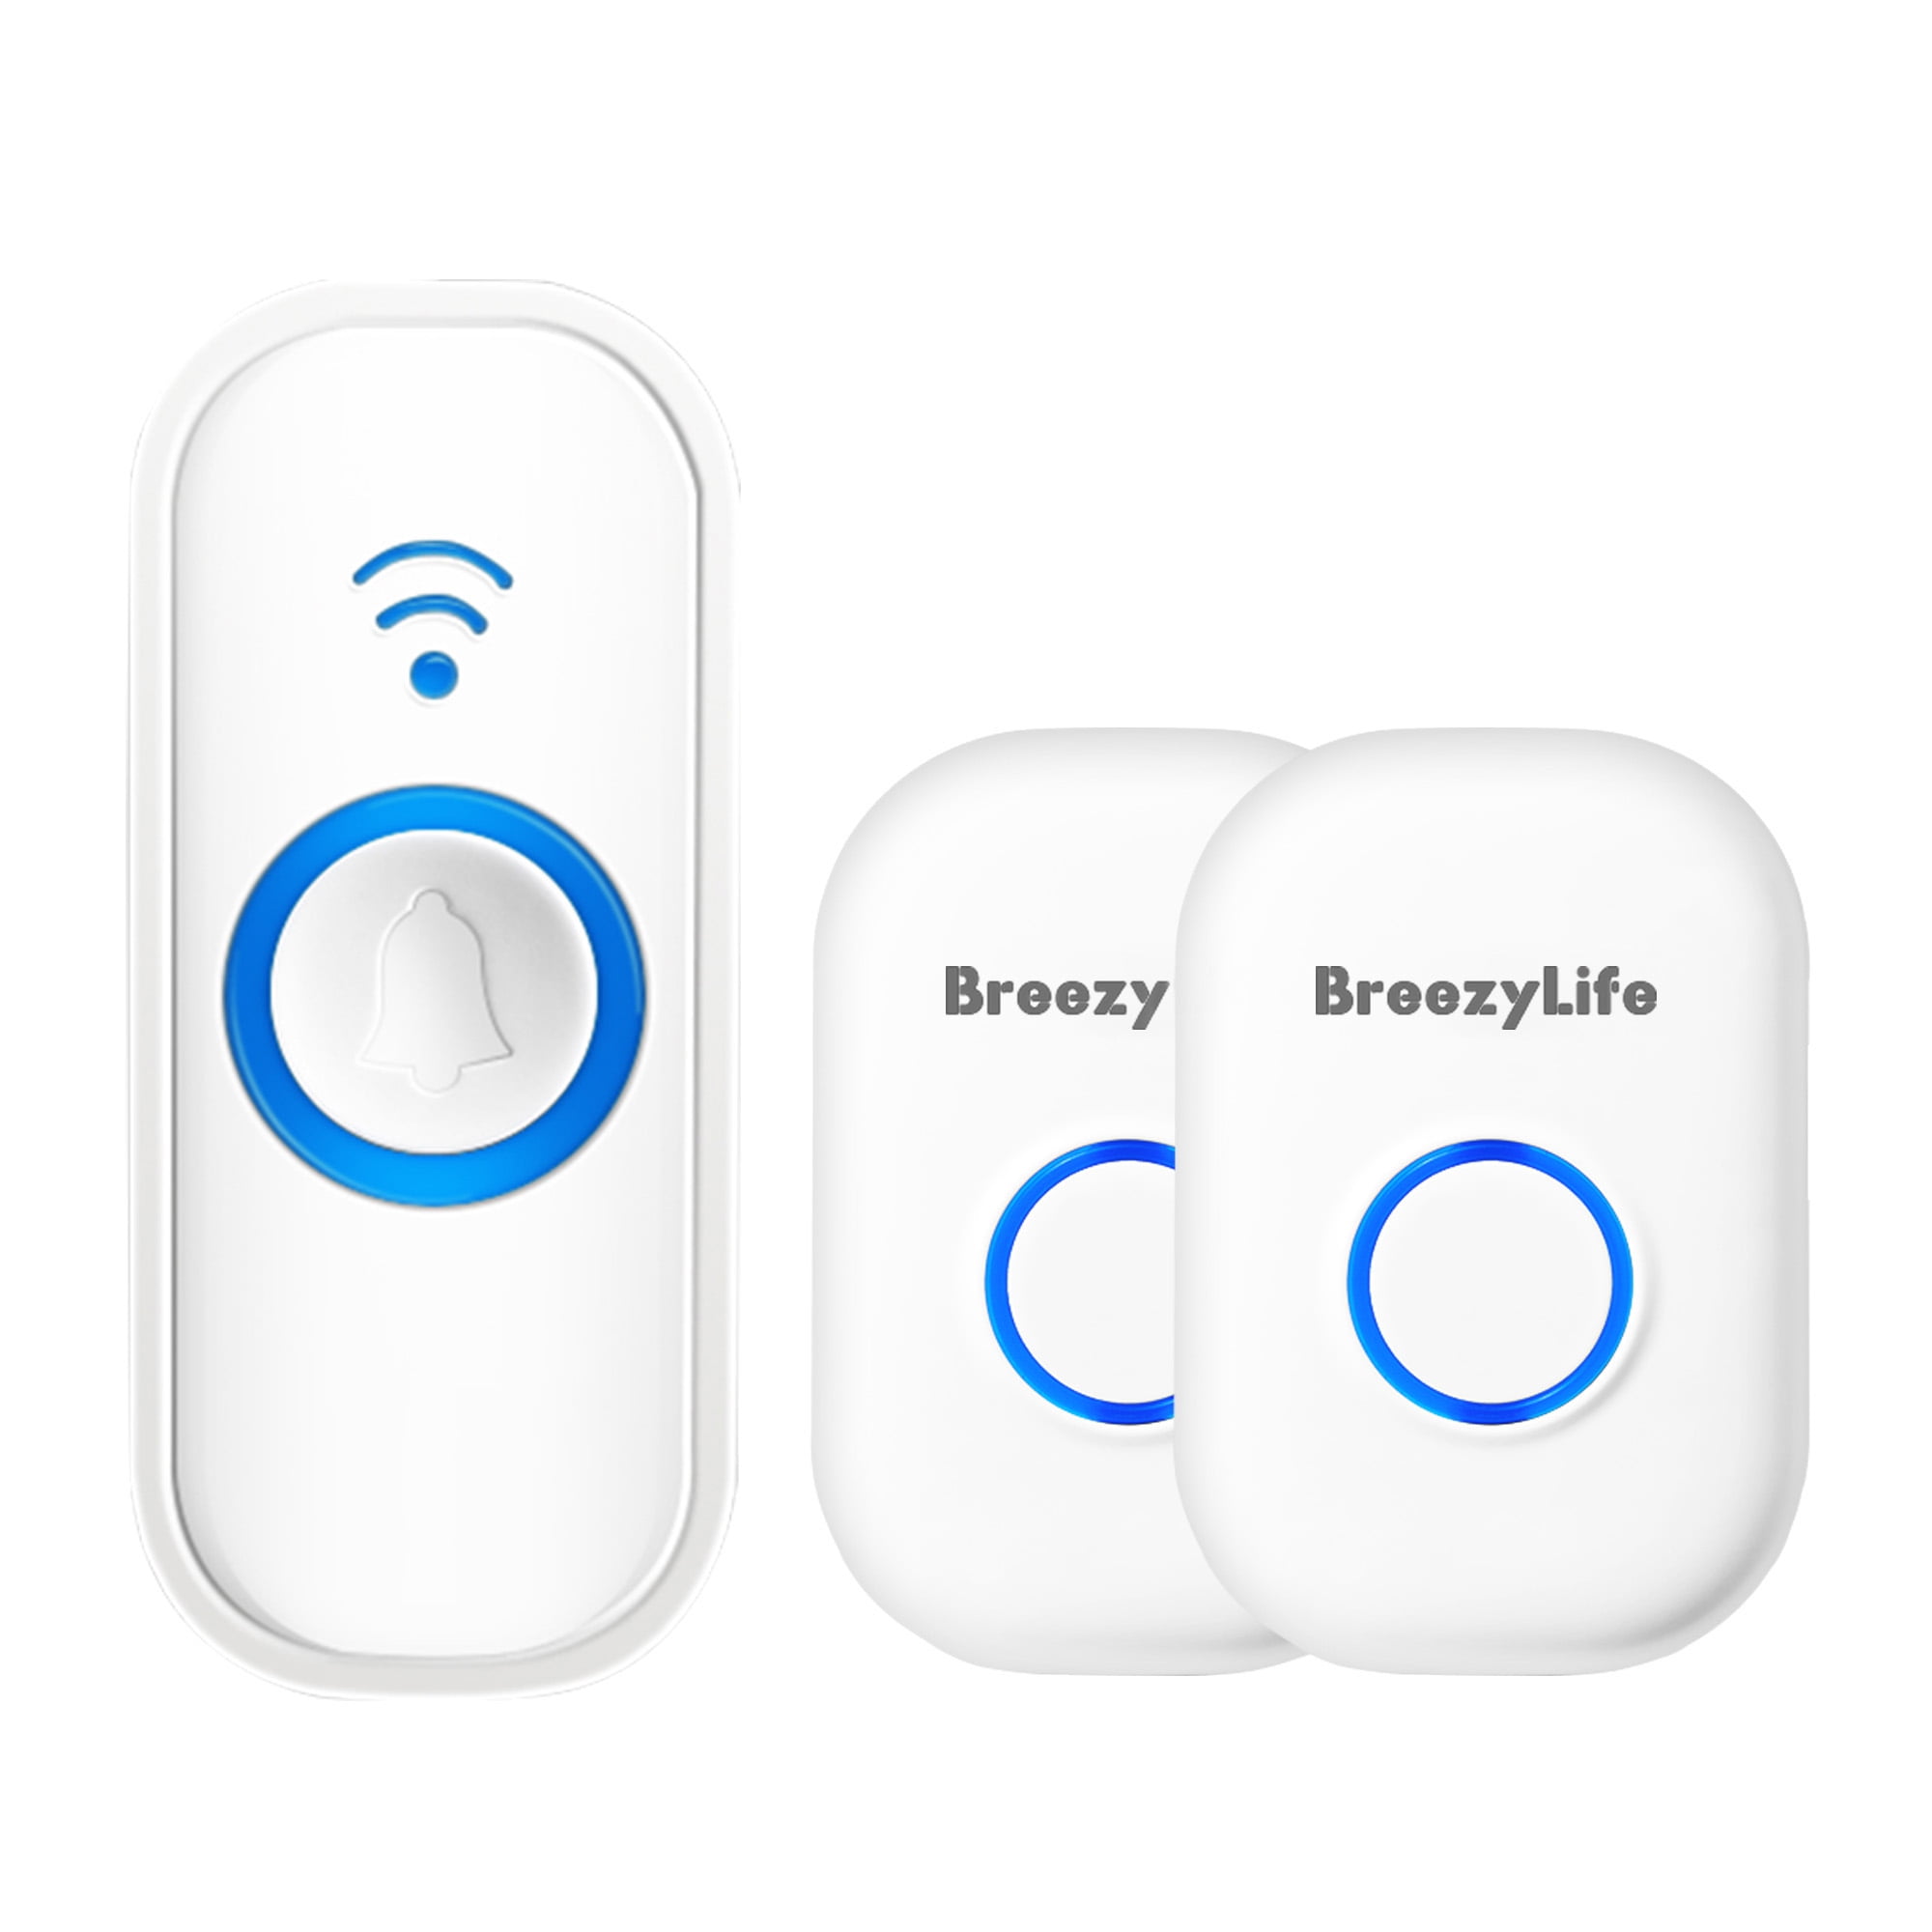 100m Range White Easy Chime Doorbell No Battery Required 1byone Wireless Doorbell Set Doorbell with 1 Receiver and 1 Transmitter 36 Ringtones